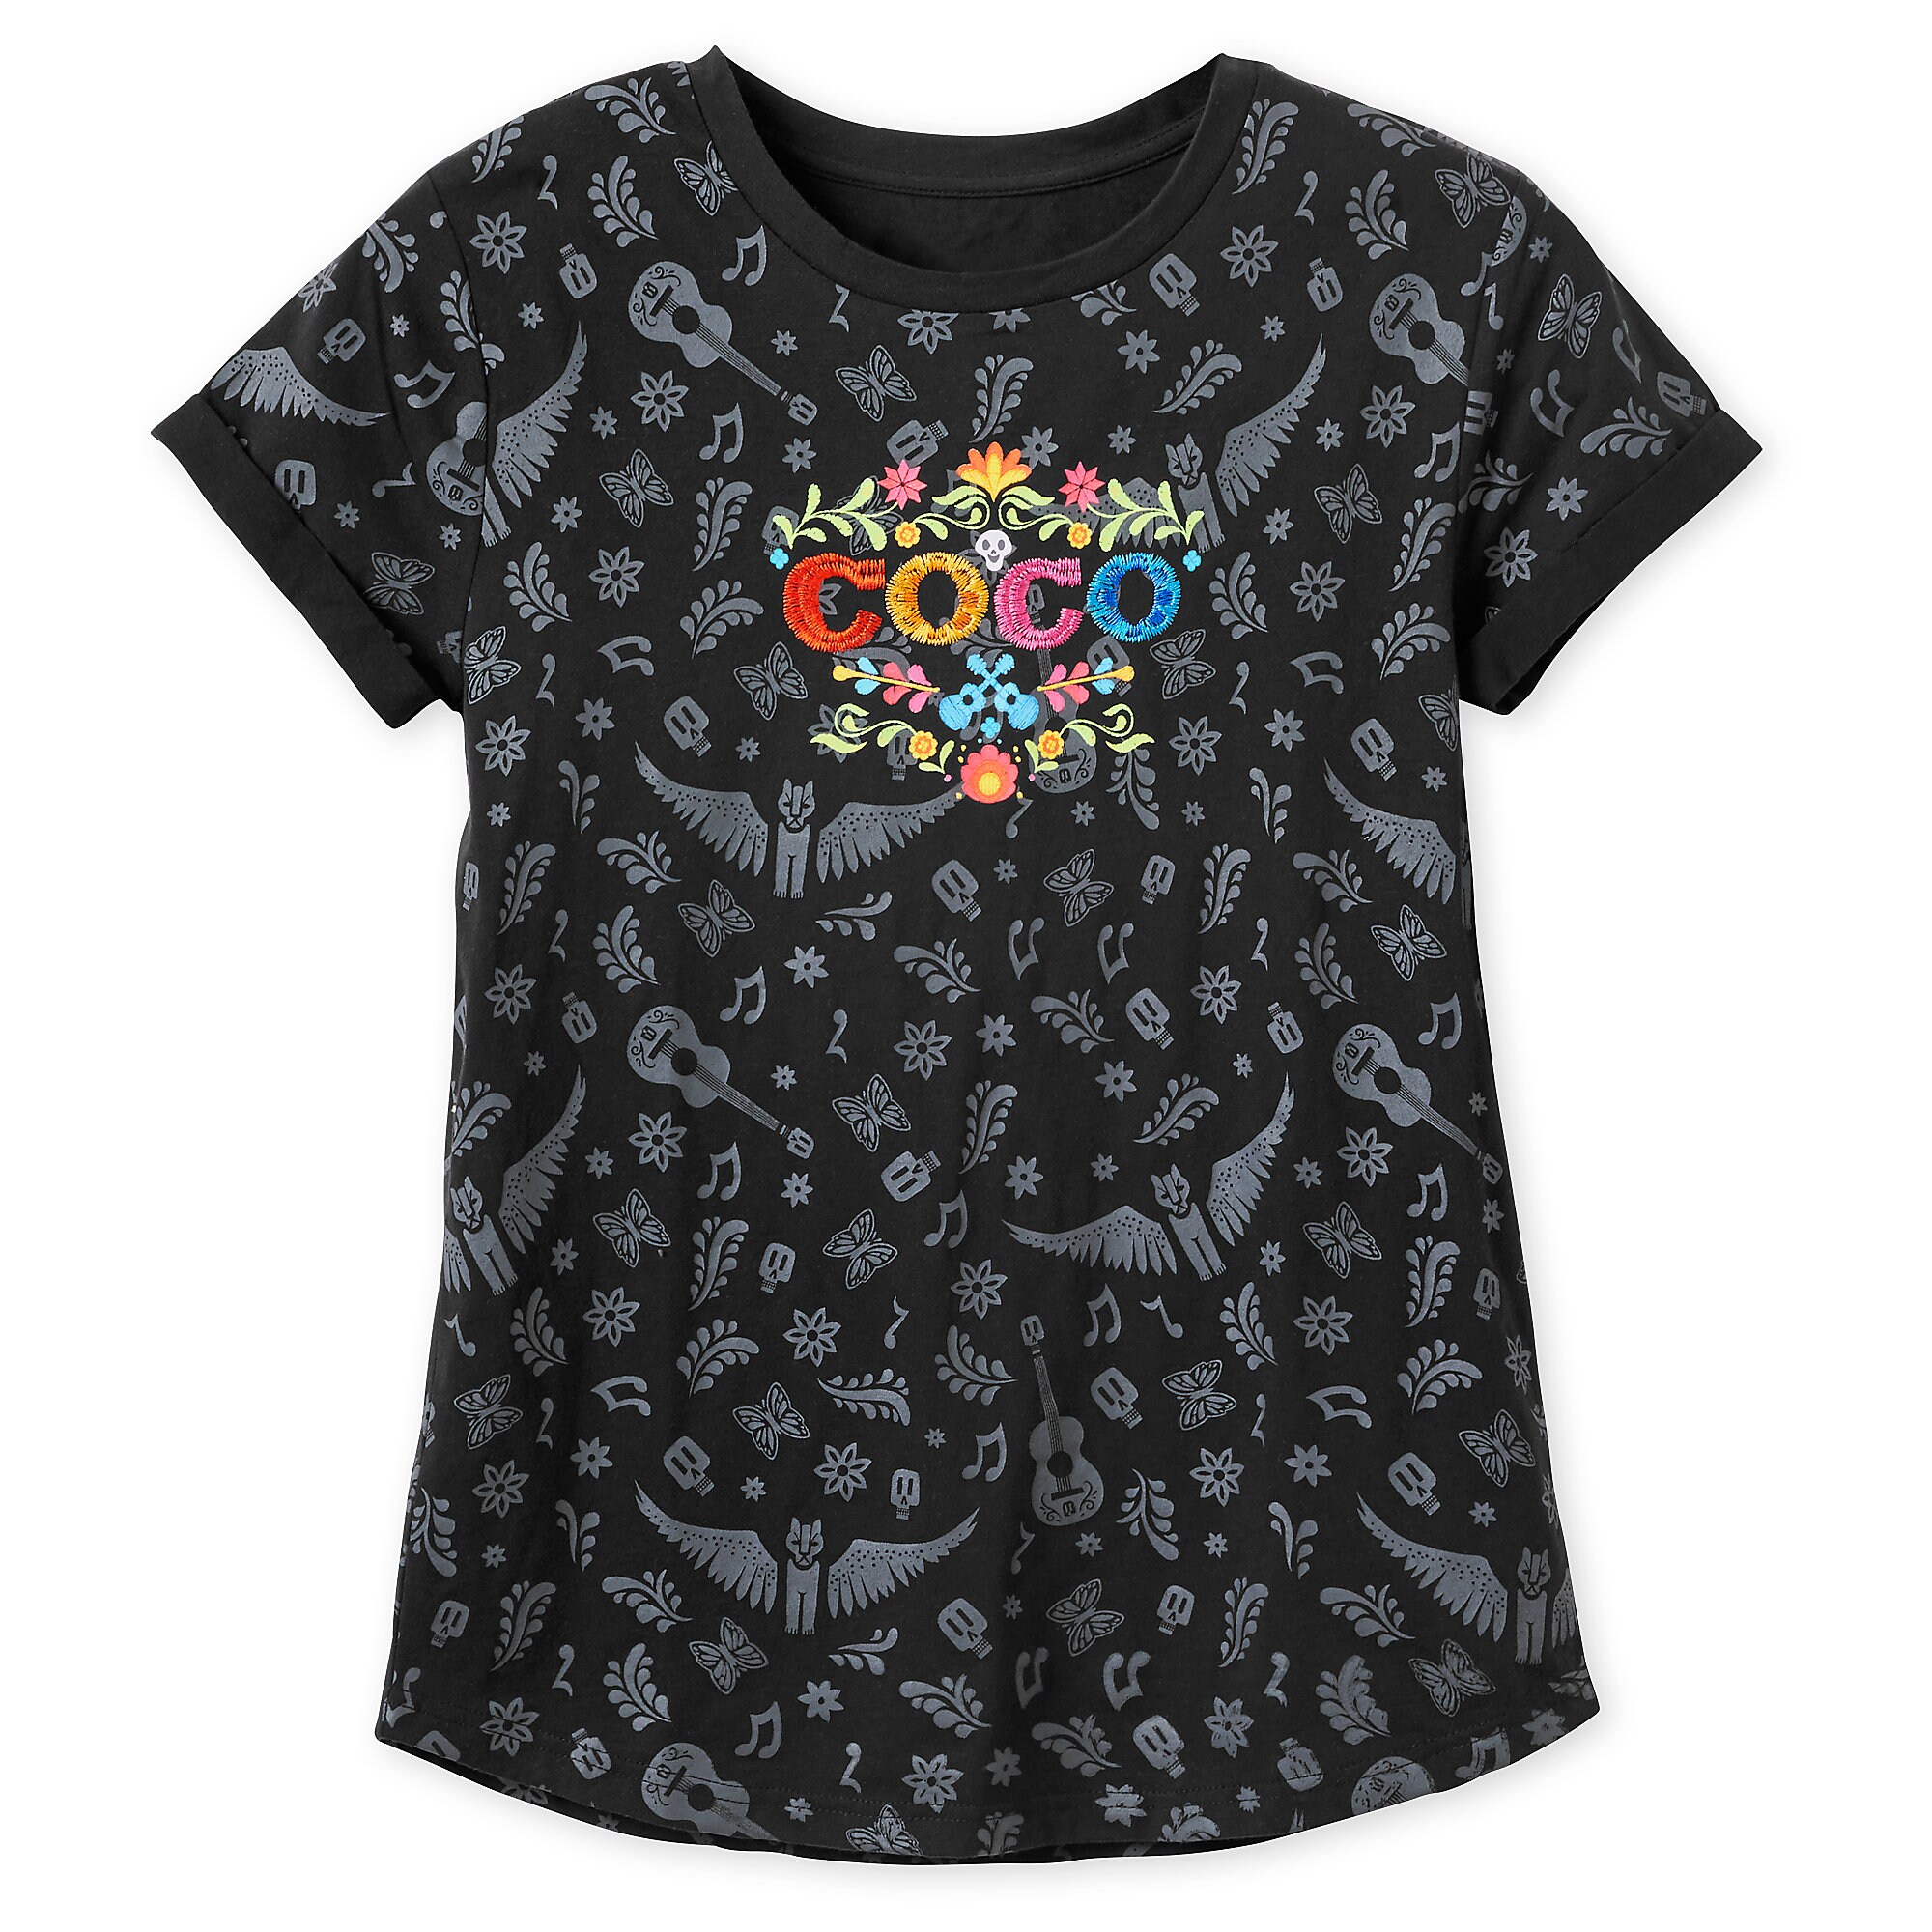 Coco Embroidered T-Shirt for Women